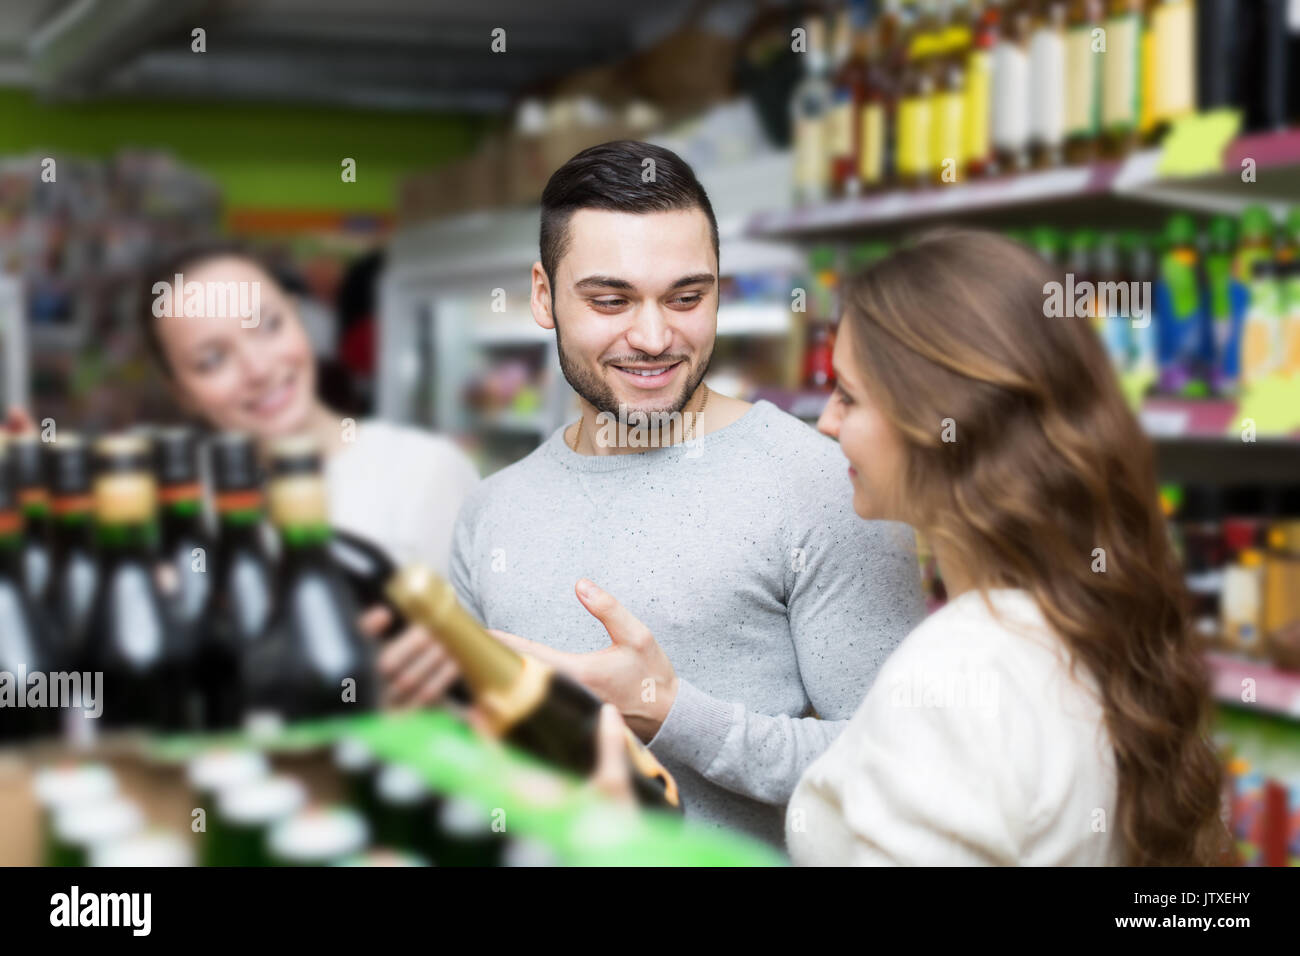 Adult happy shoppers choosing bottle of wine at liquor store Stock Photo